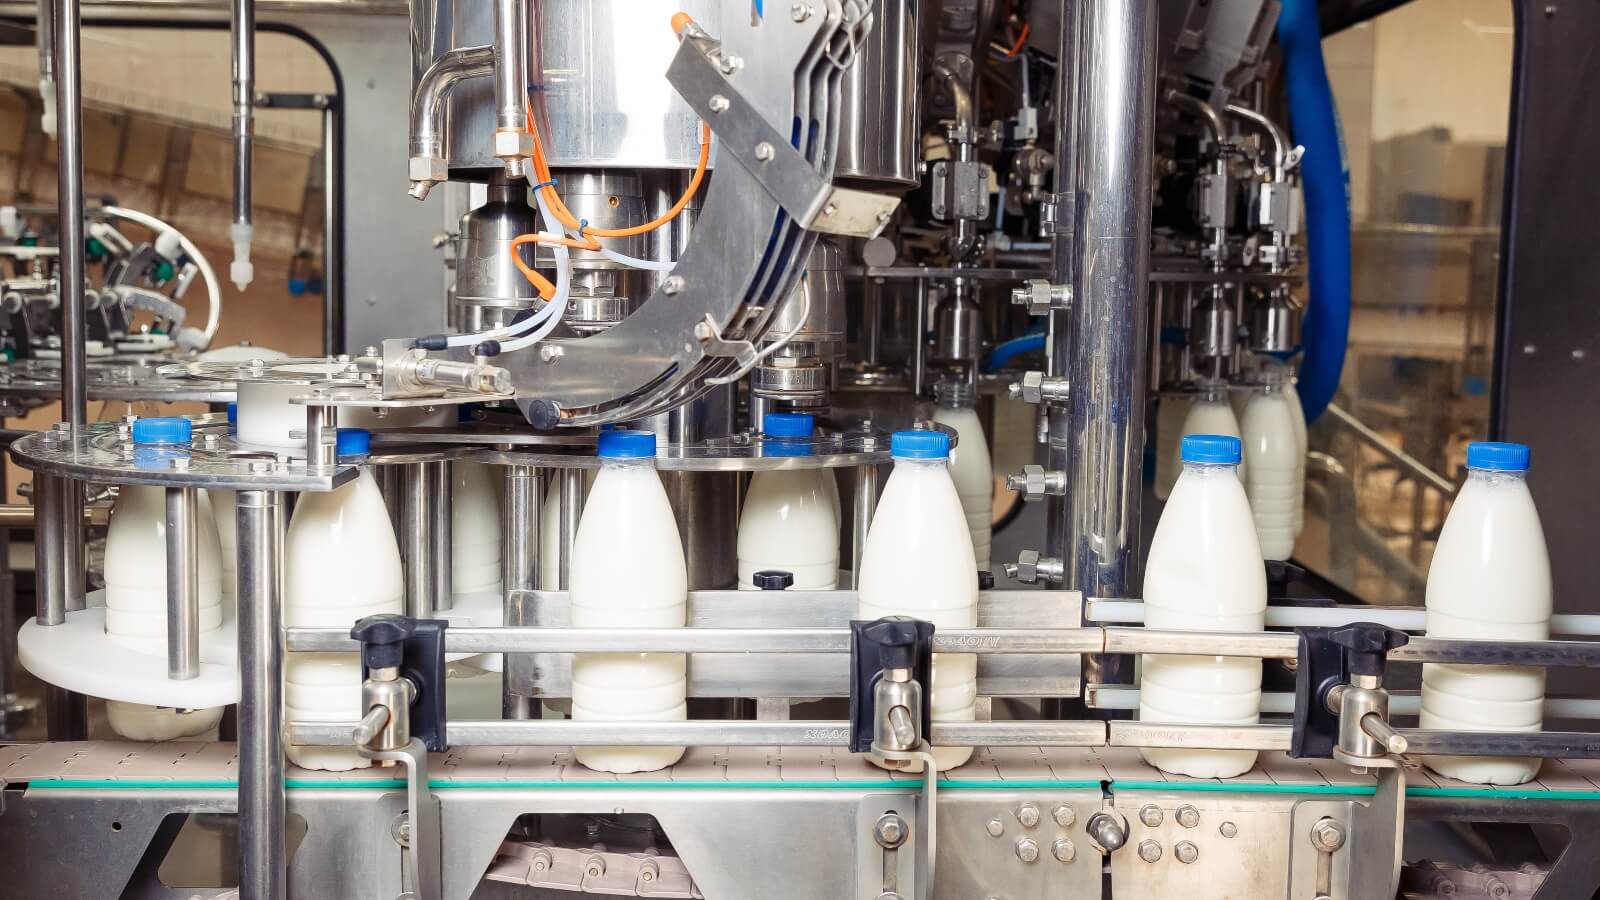 Bottles of cow's milk on a conveyer belt in a dairy facility